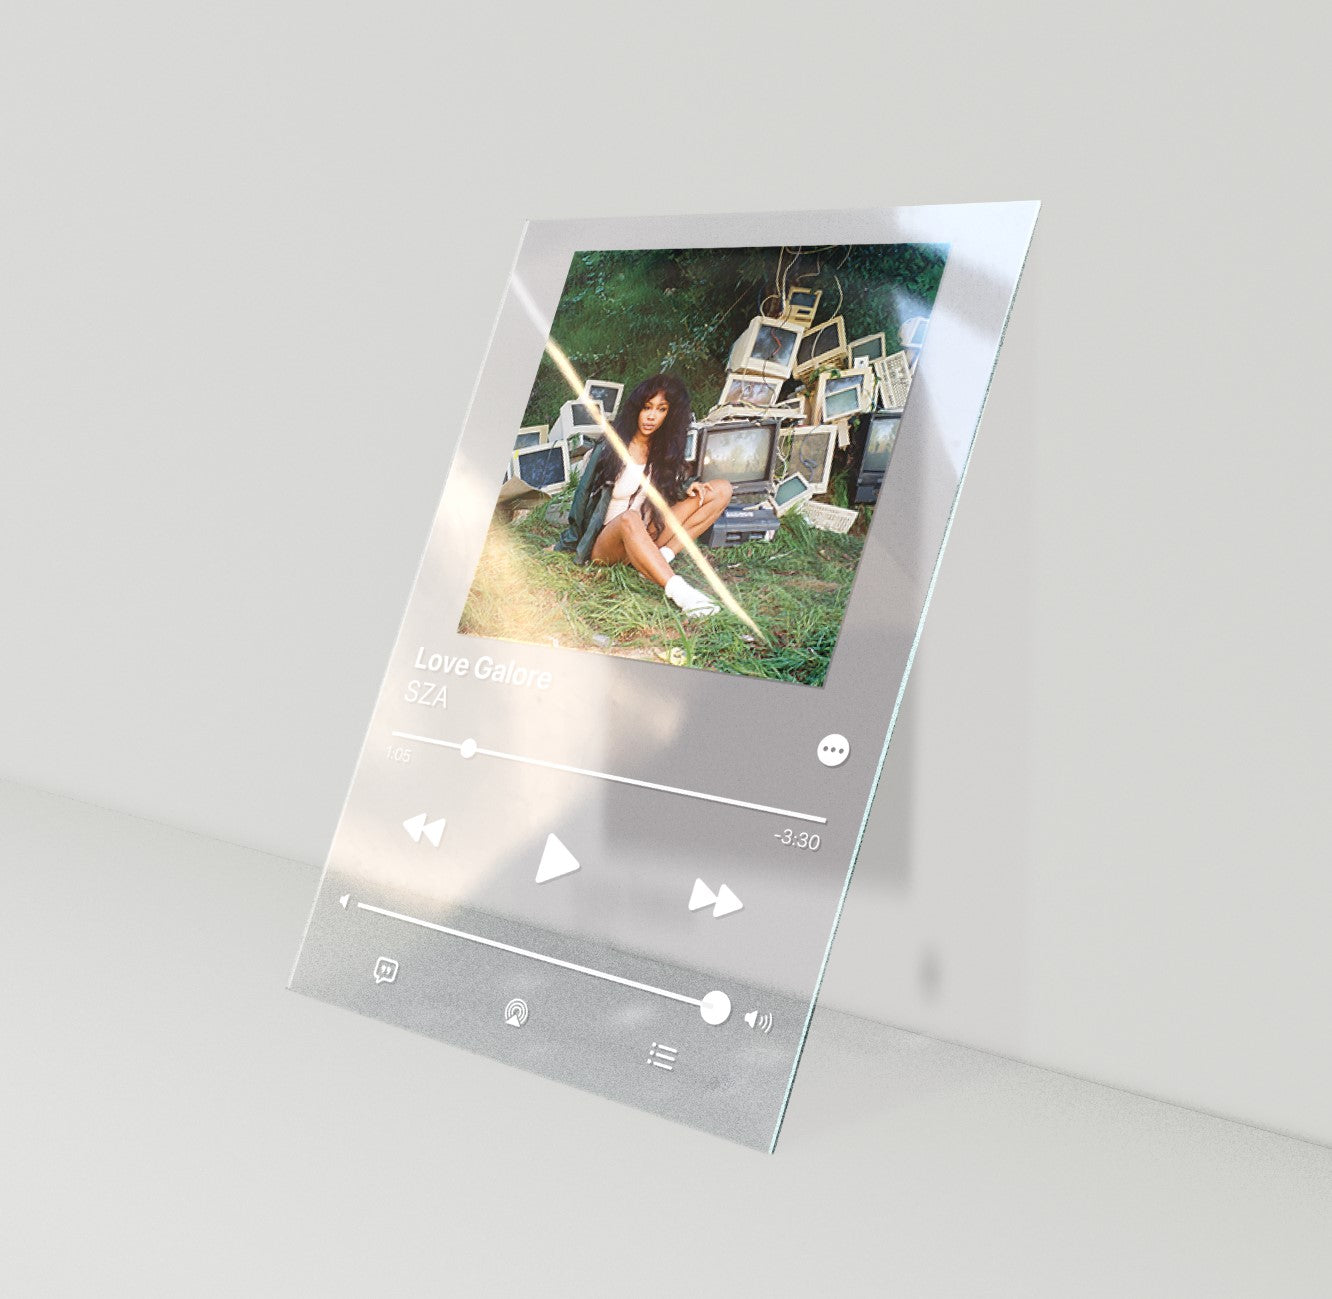 Personalized Acrylic Album Cover - APPLE MUSIC song - Pictical™